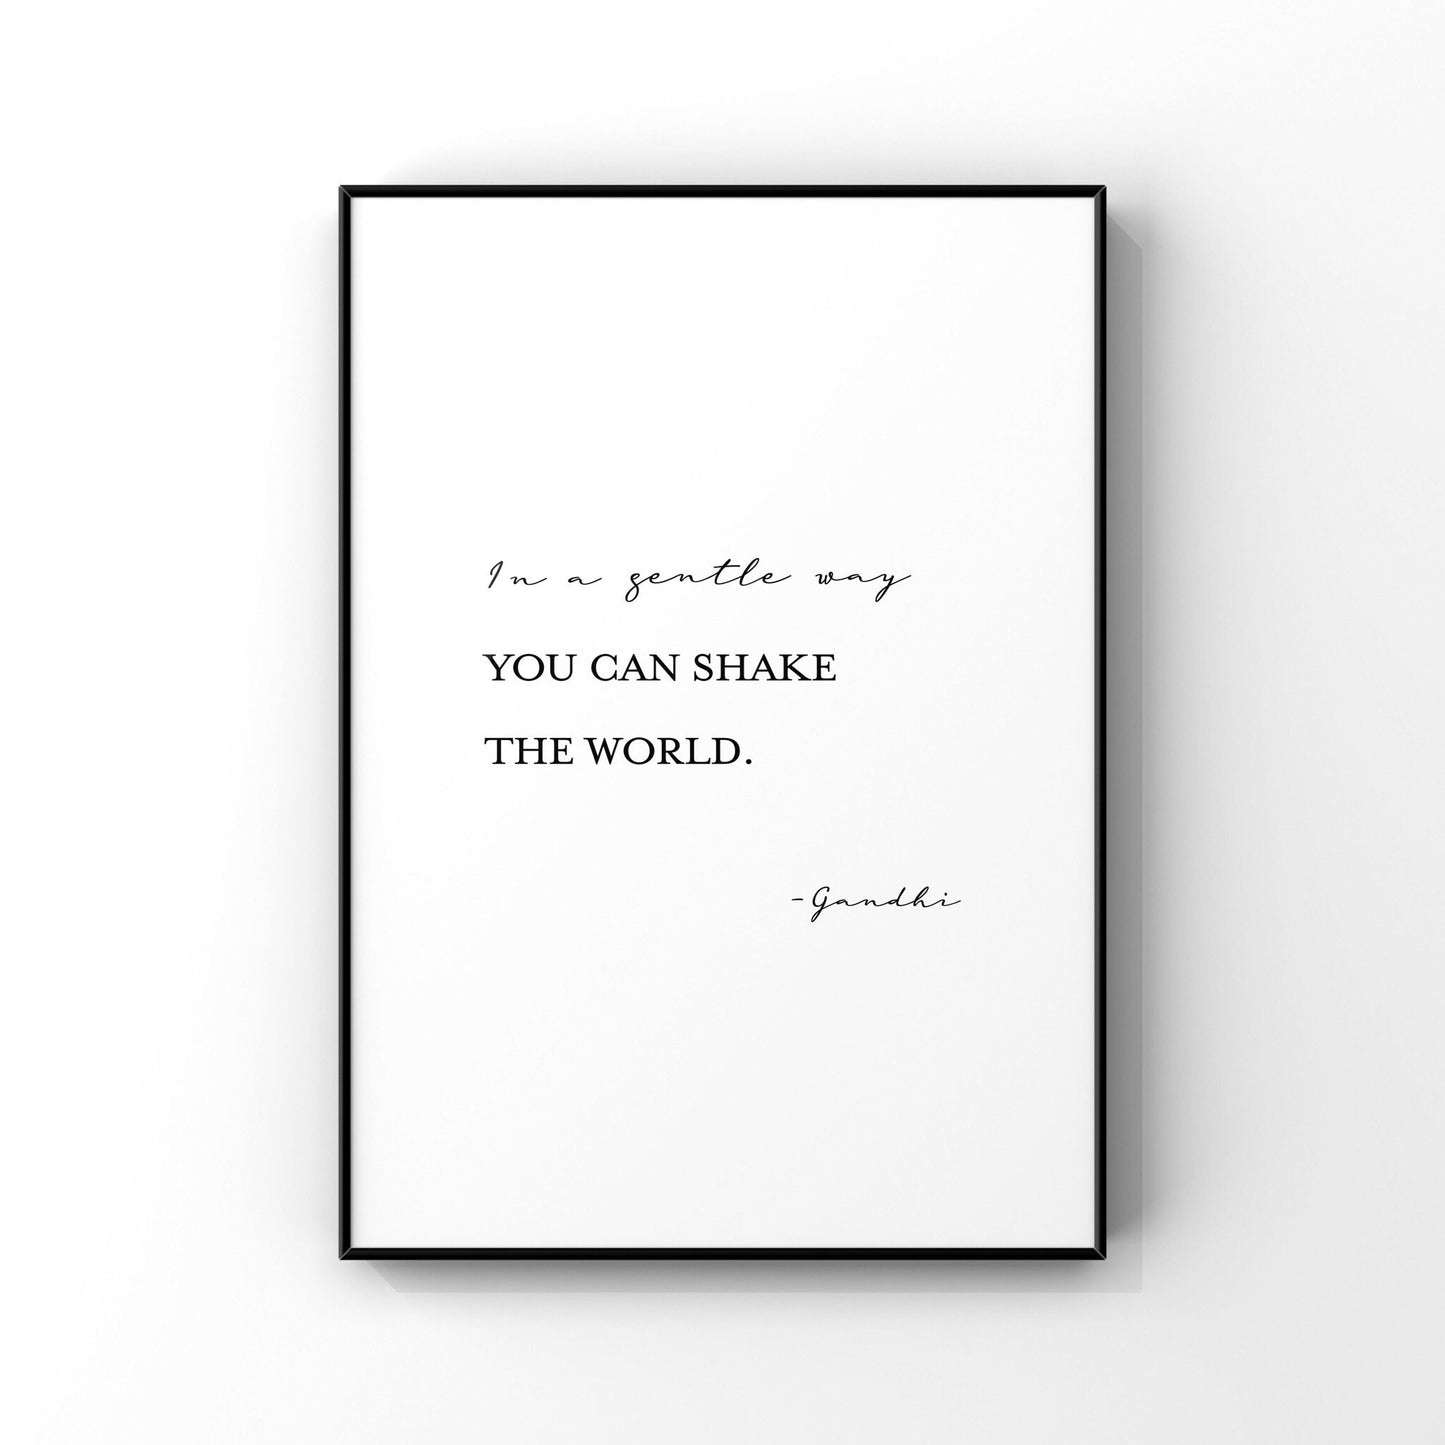 In a gentle way you can shake the world,Mahatma Gandhi quote,Inspirational quote print,Office decor,Motivational quote